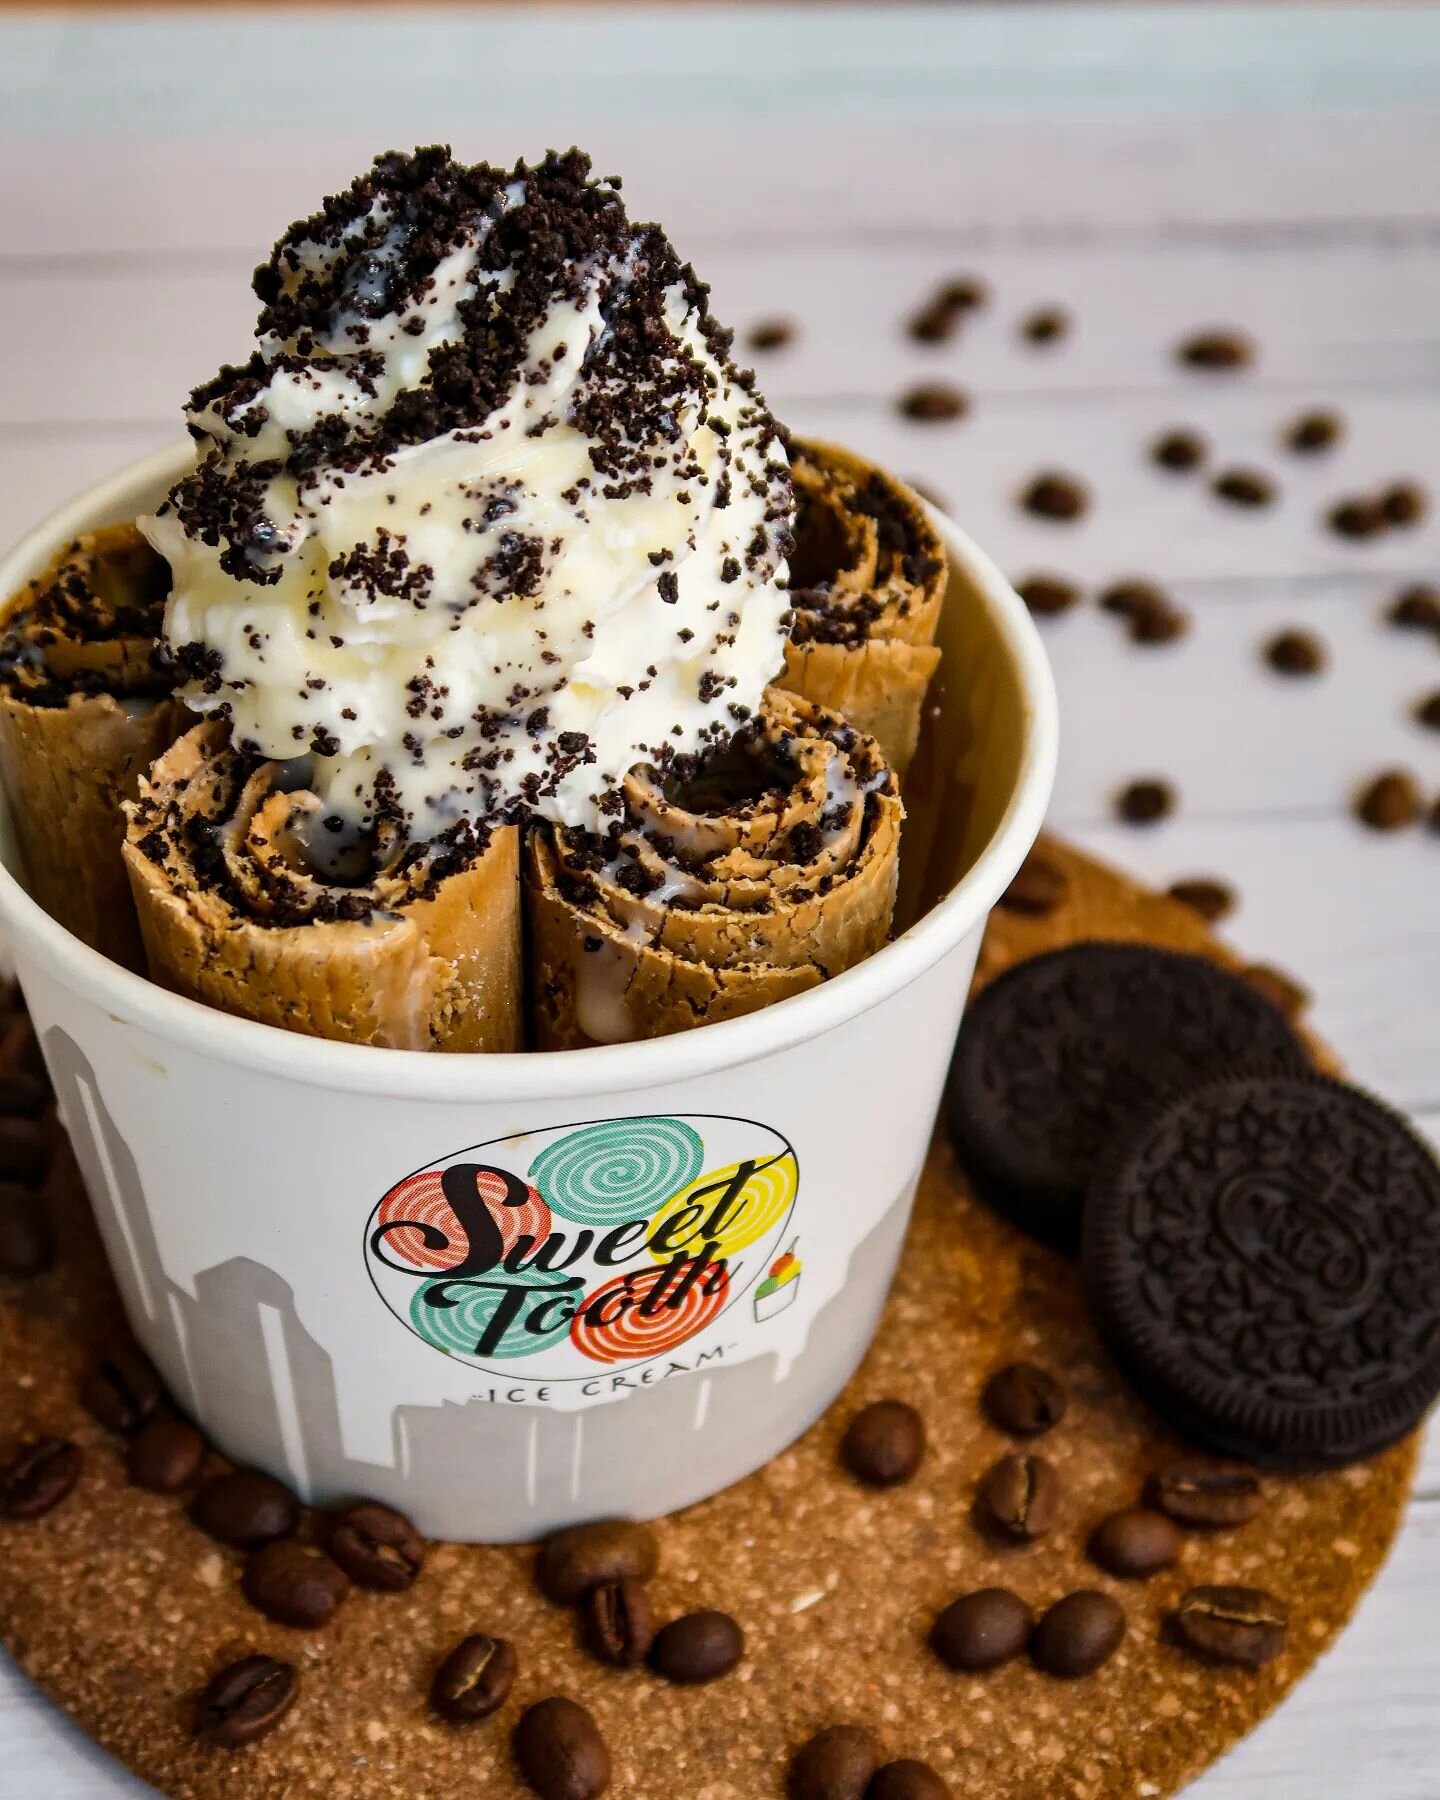 Happy Monday!
Kick-start your week the right way with a strong coffee rolled ice cream😋☕

Ft. MORNING ESPRESSO - strong espresso base with oreos and condensed milk. 

#SweetToothIceCream #YYCfood #YYCeats #YYCicecream #yycdesserts #yycfoodblogger #r